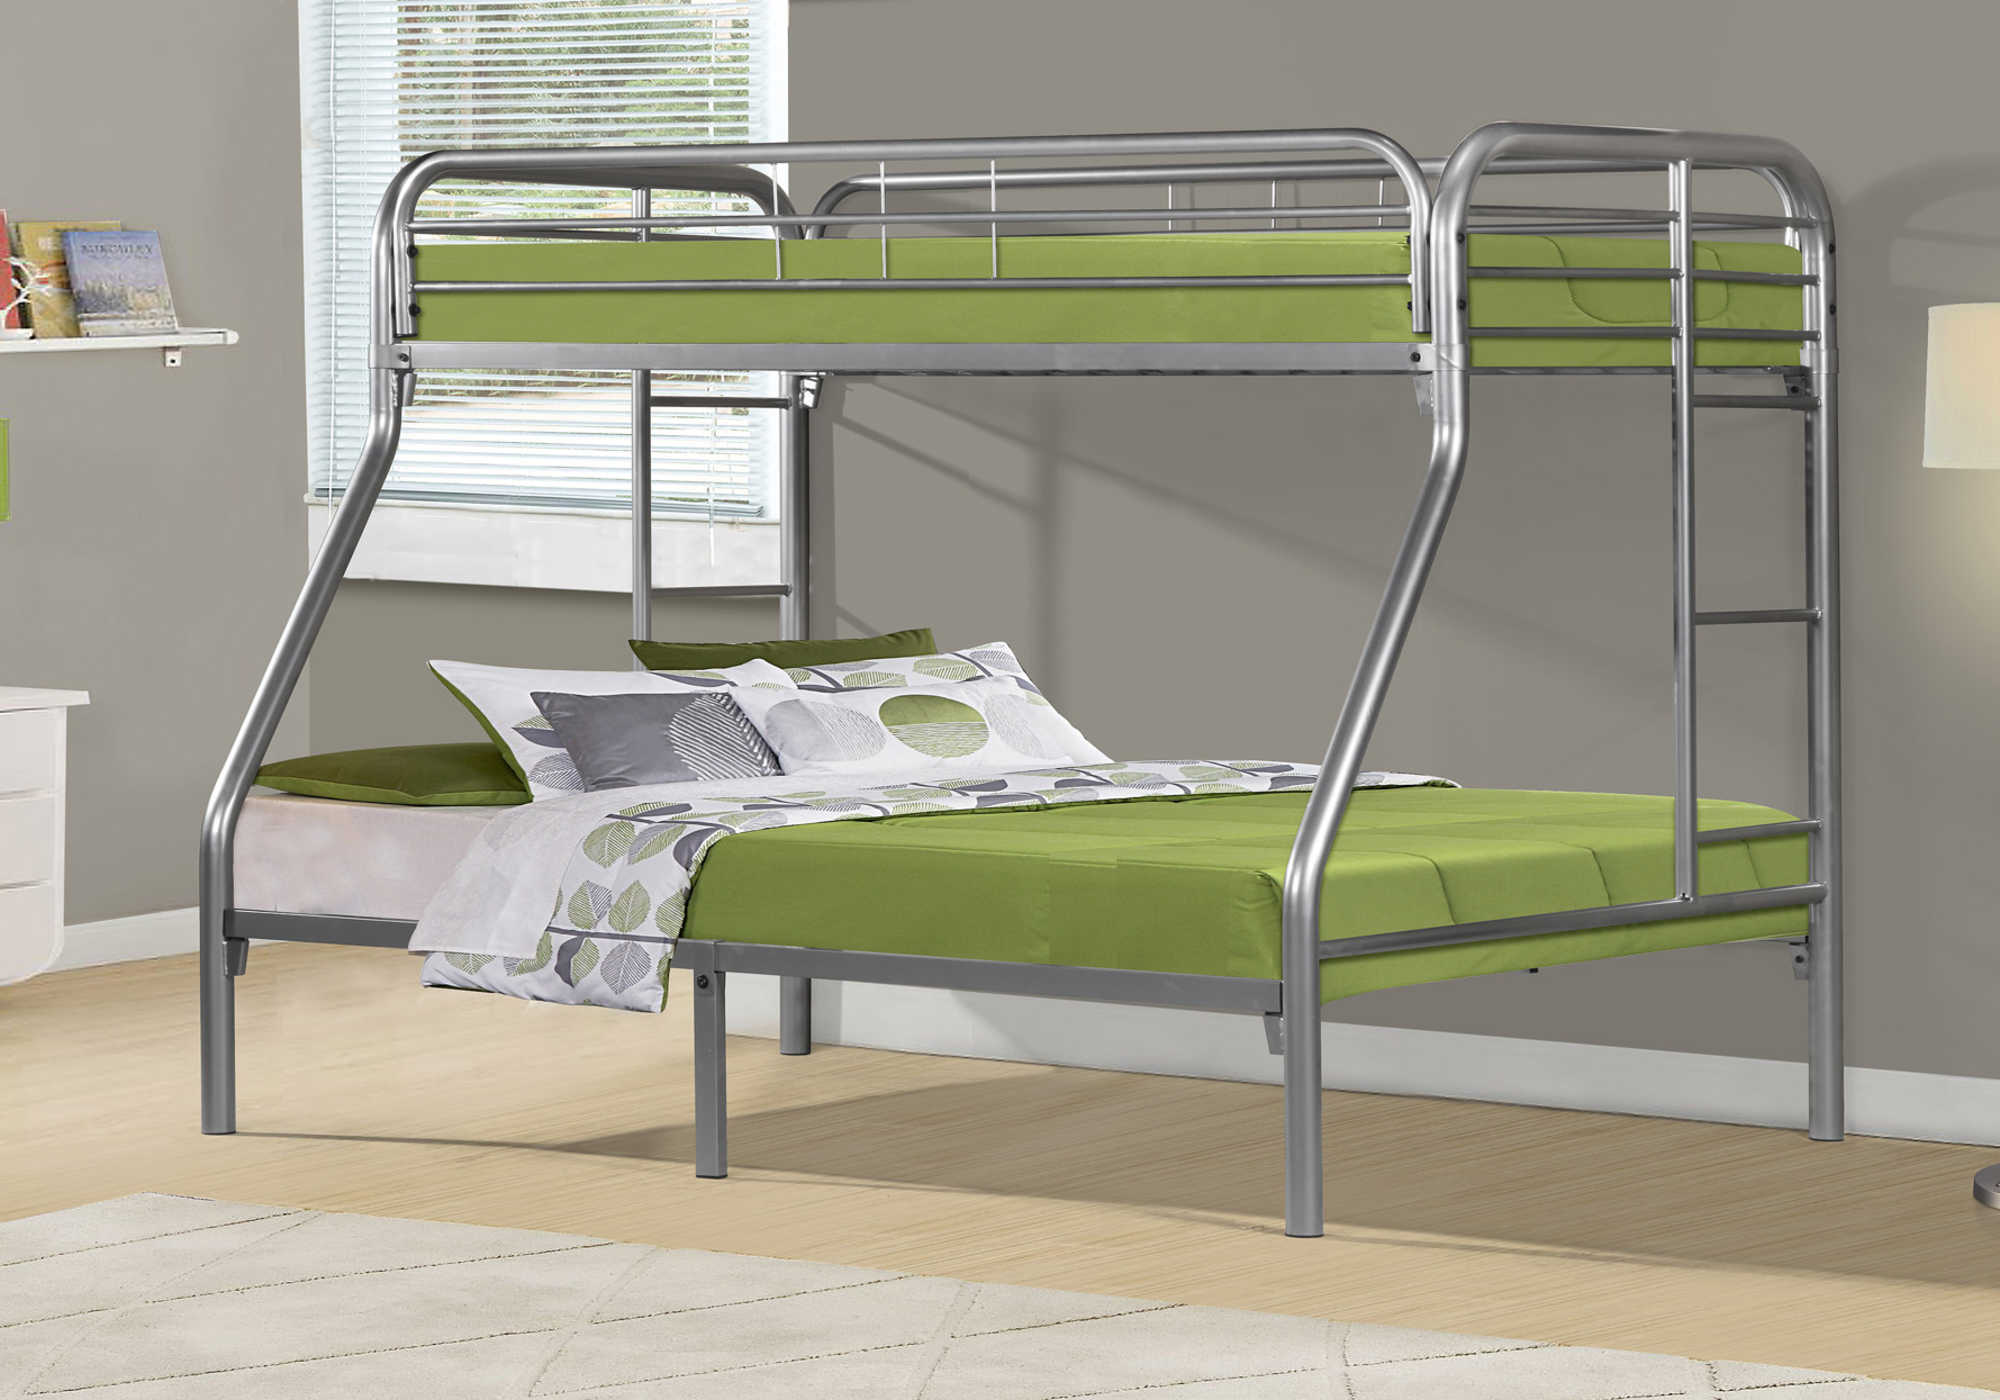 BUNK BED - TWIN / FULL SIZE / SILVER METAL 